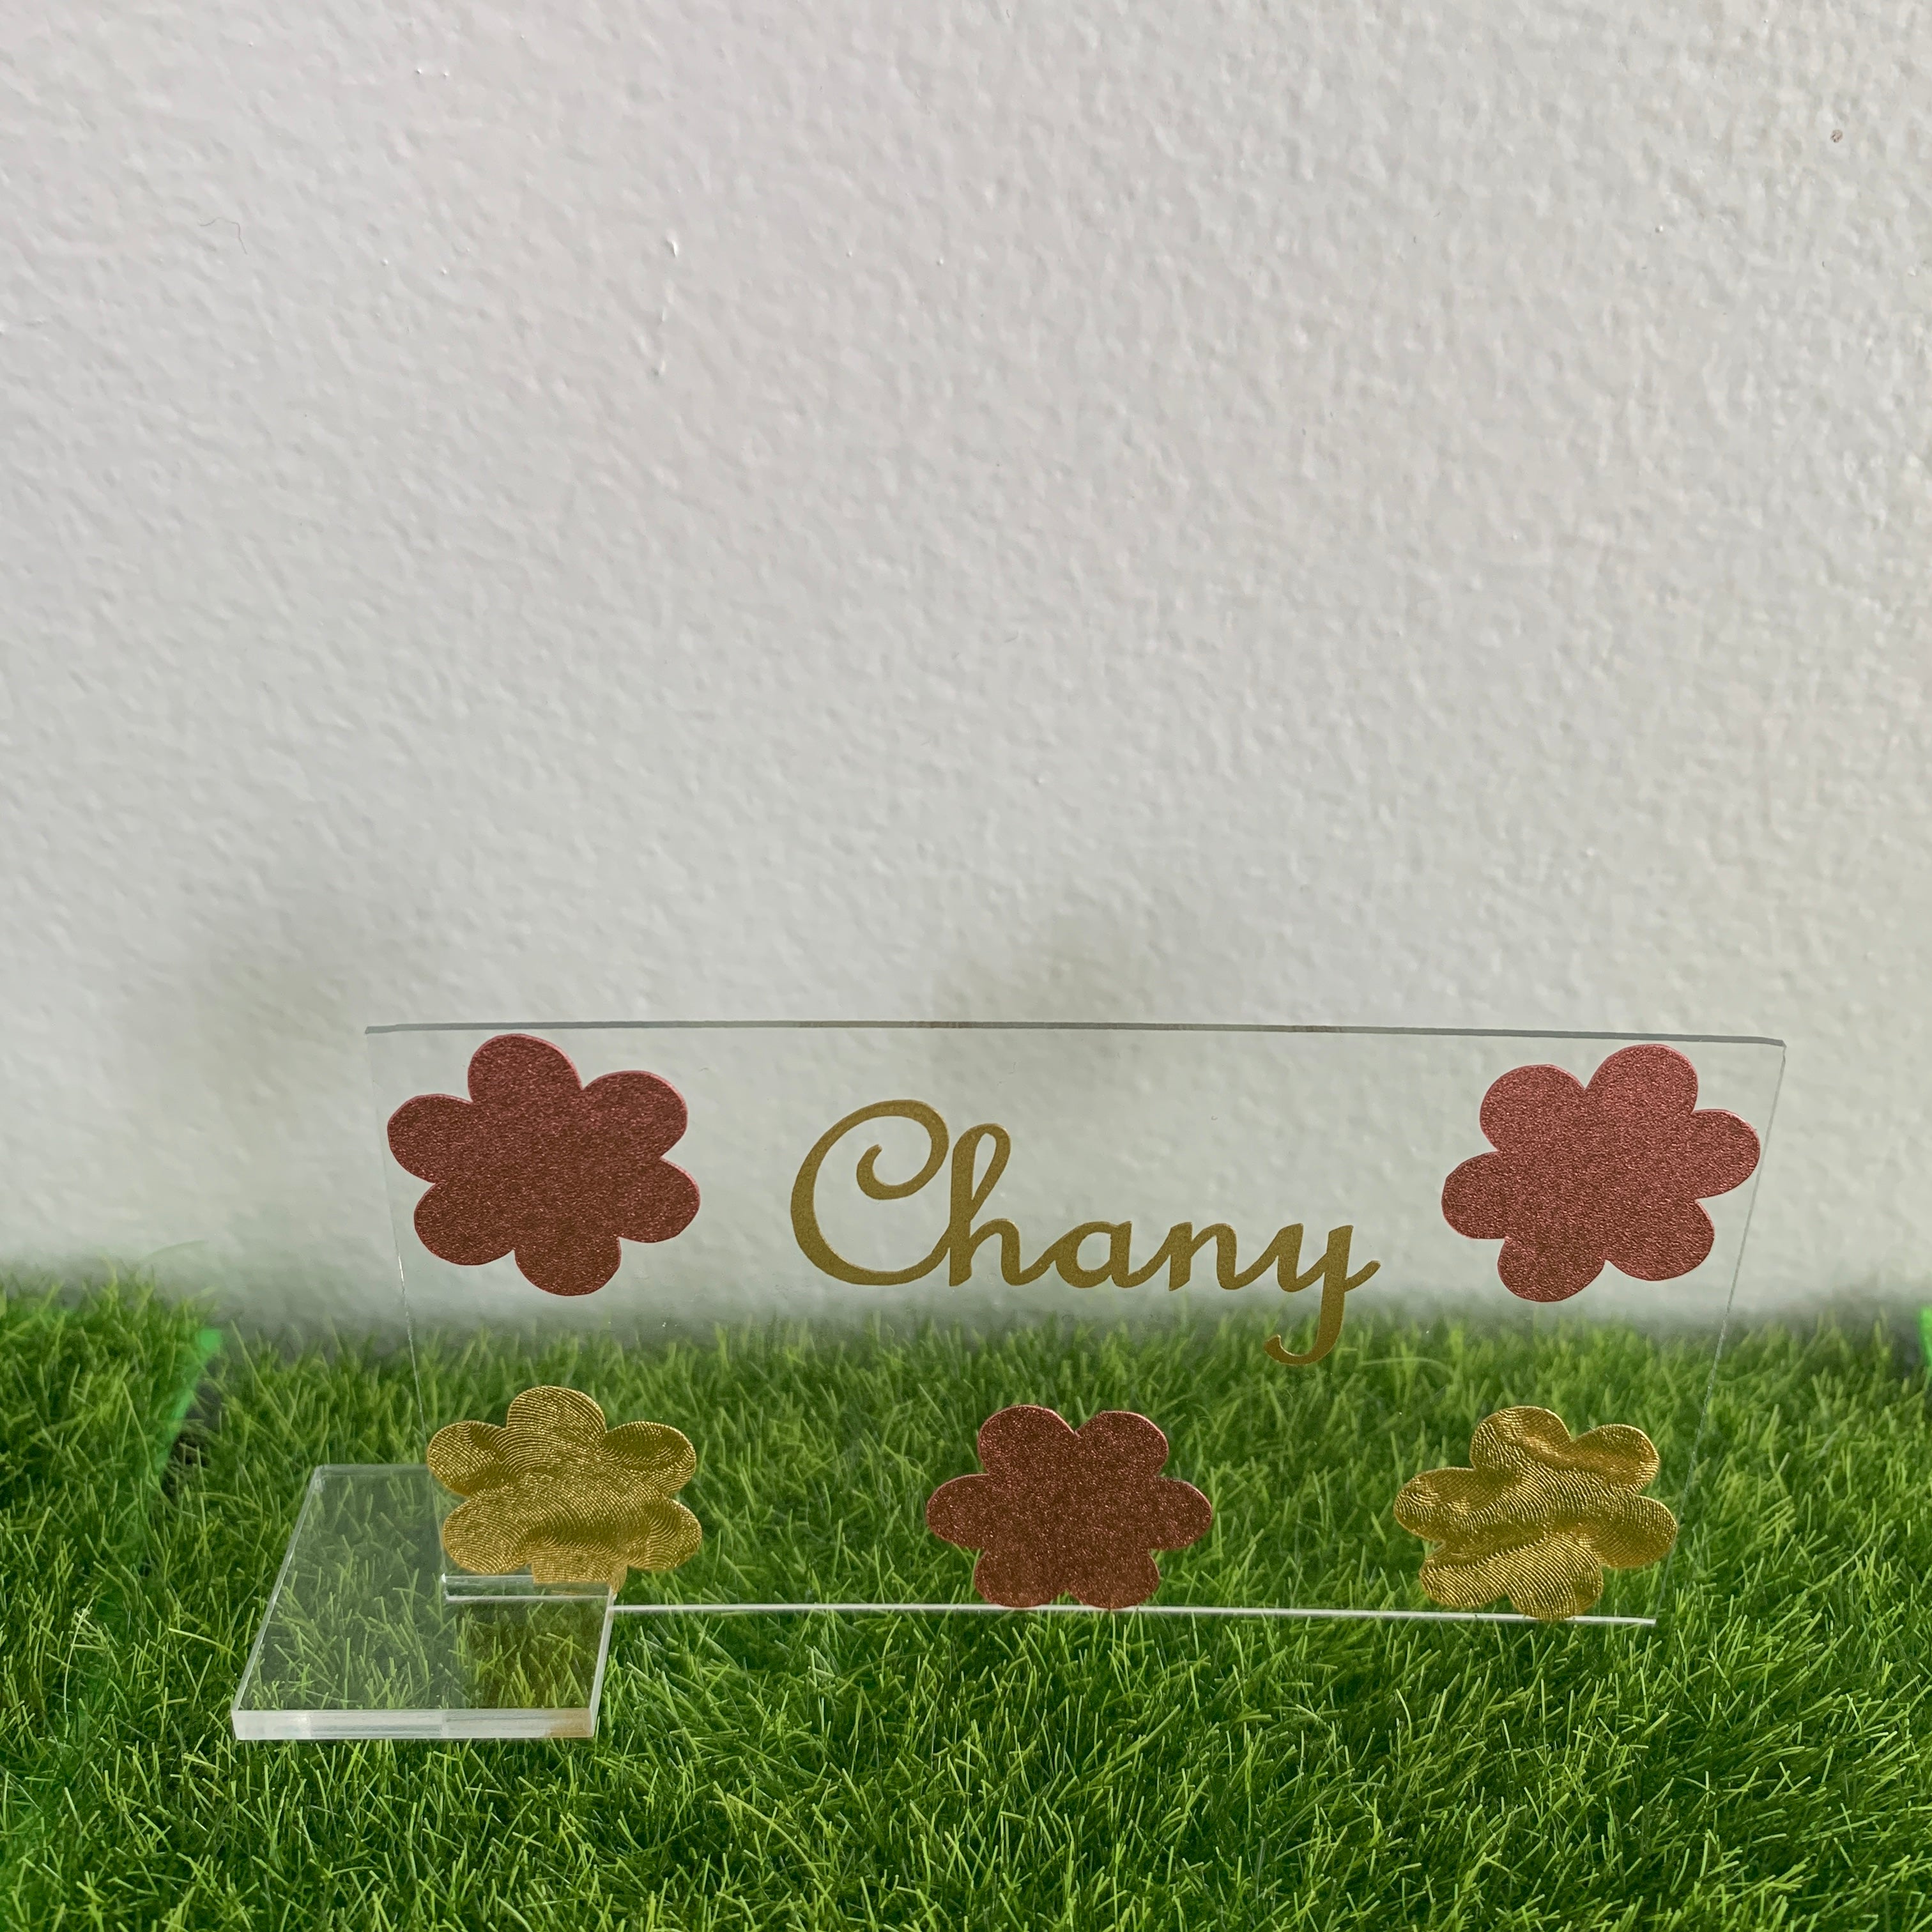 Personalized Lucite Spring place settings for Pesach Shavuous parties table decor camp